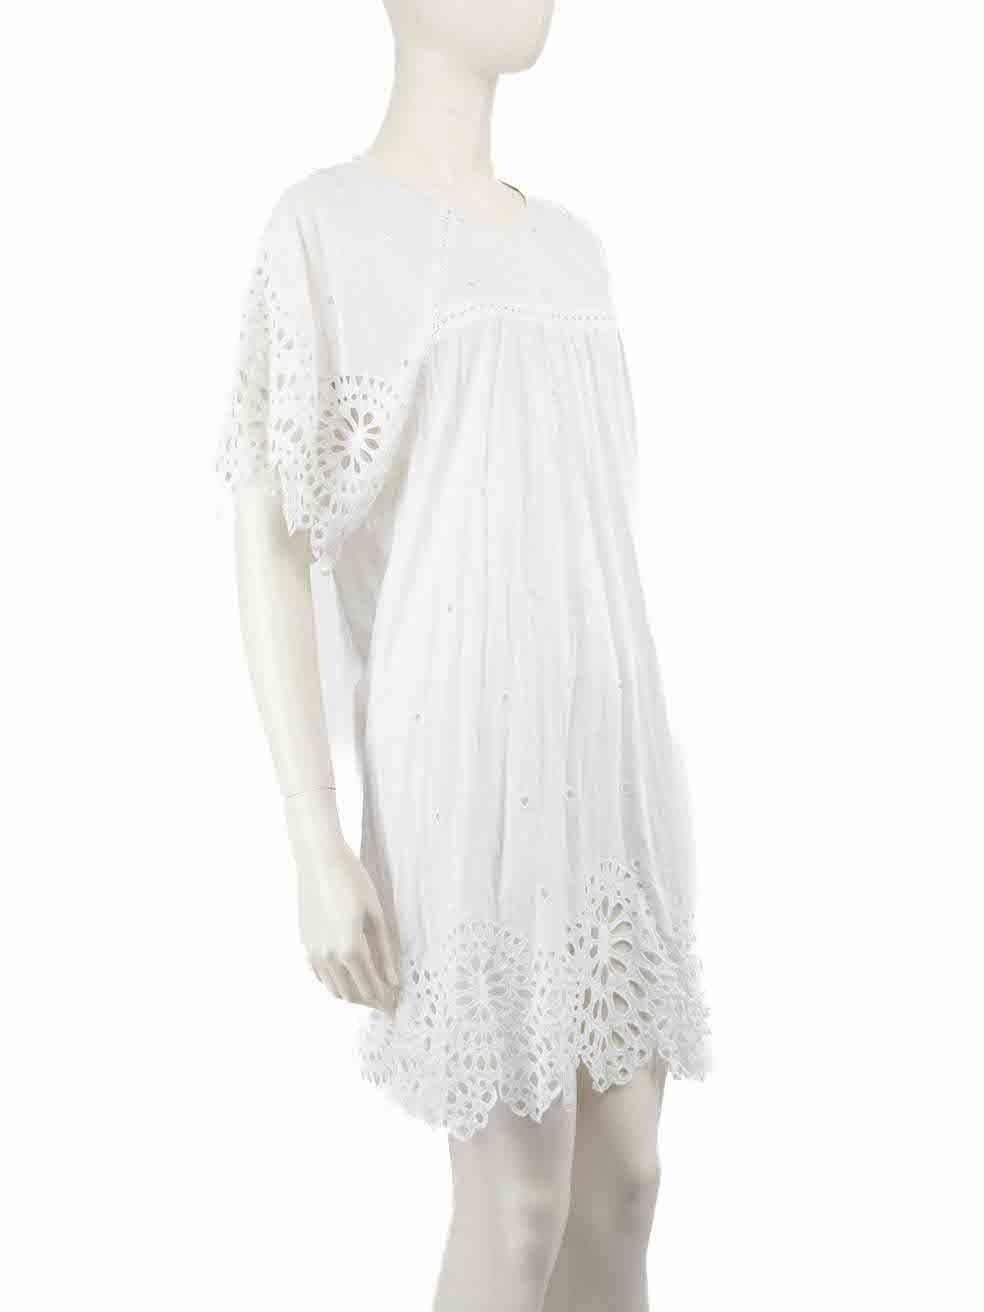 CONDITION is Very good. Minimal wear to dress is evident. Minimal wear to the embroidery with loose threads at the front and back. The neckline trim is also slightly discoloured on this used Isabel Marant designer resale item.
 
 
 
 Details
 
 
